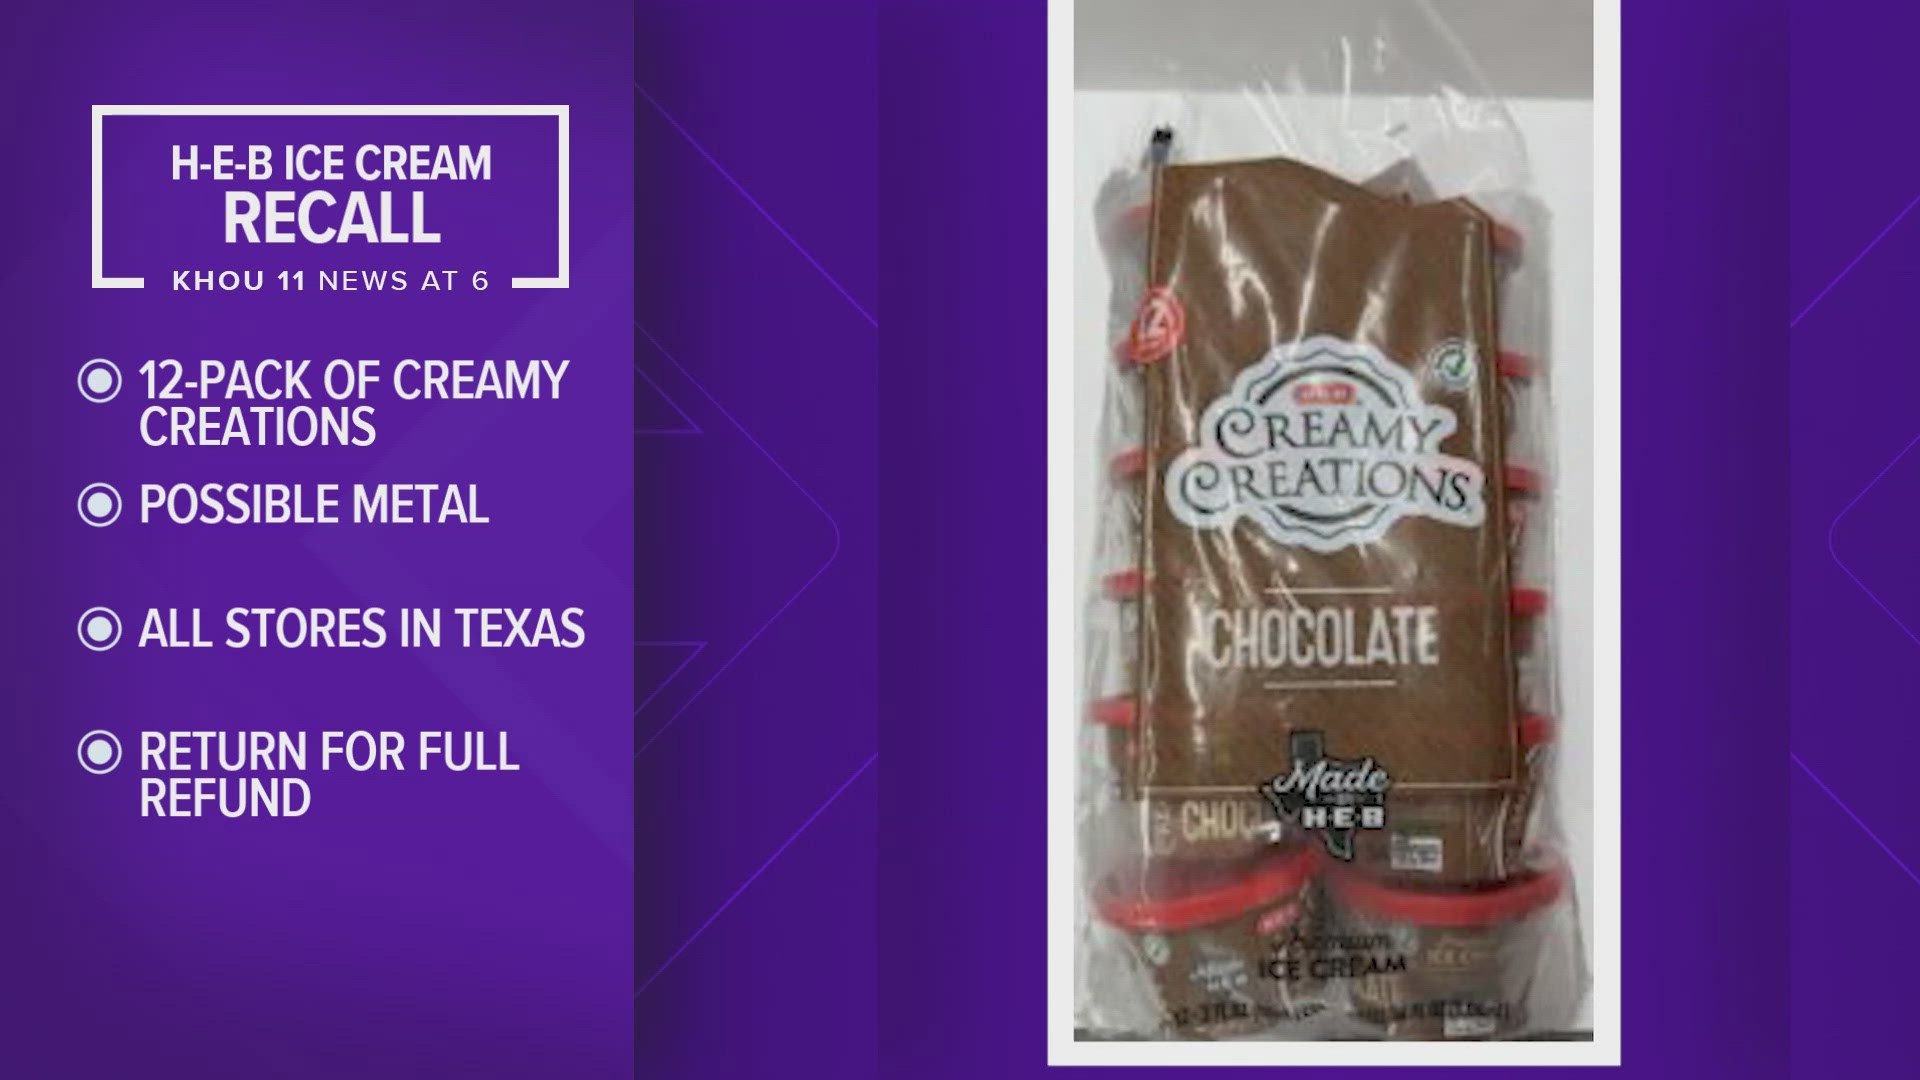 The recall affects the 12-pack of three-ounce cups of "Creamy Creations" ice cream. HEB says it is possible some metal may have gotten into the product.